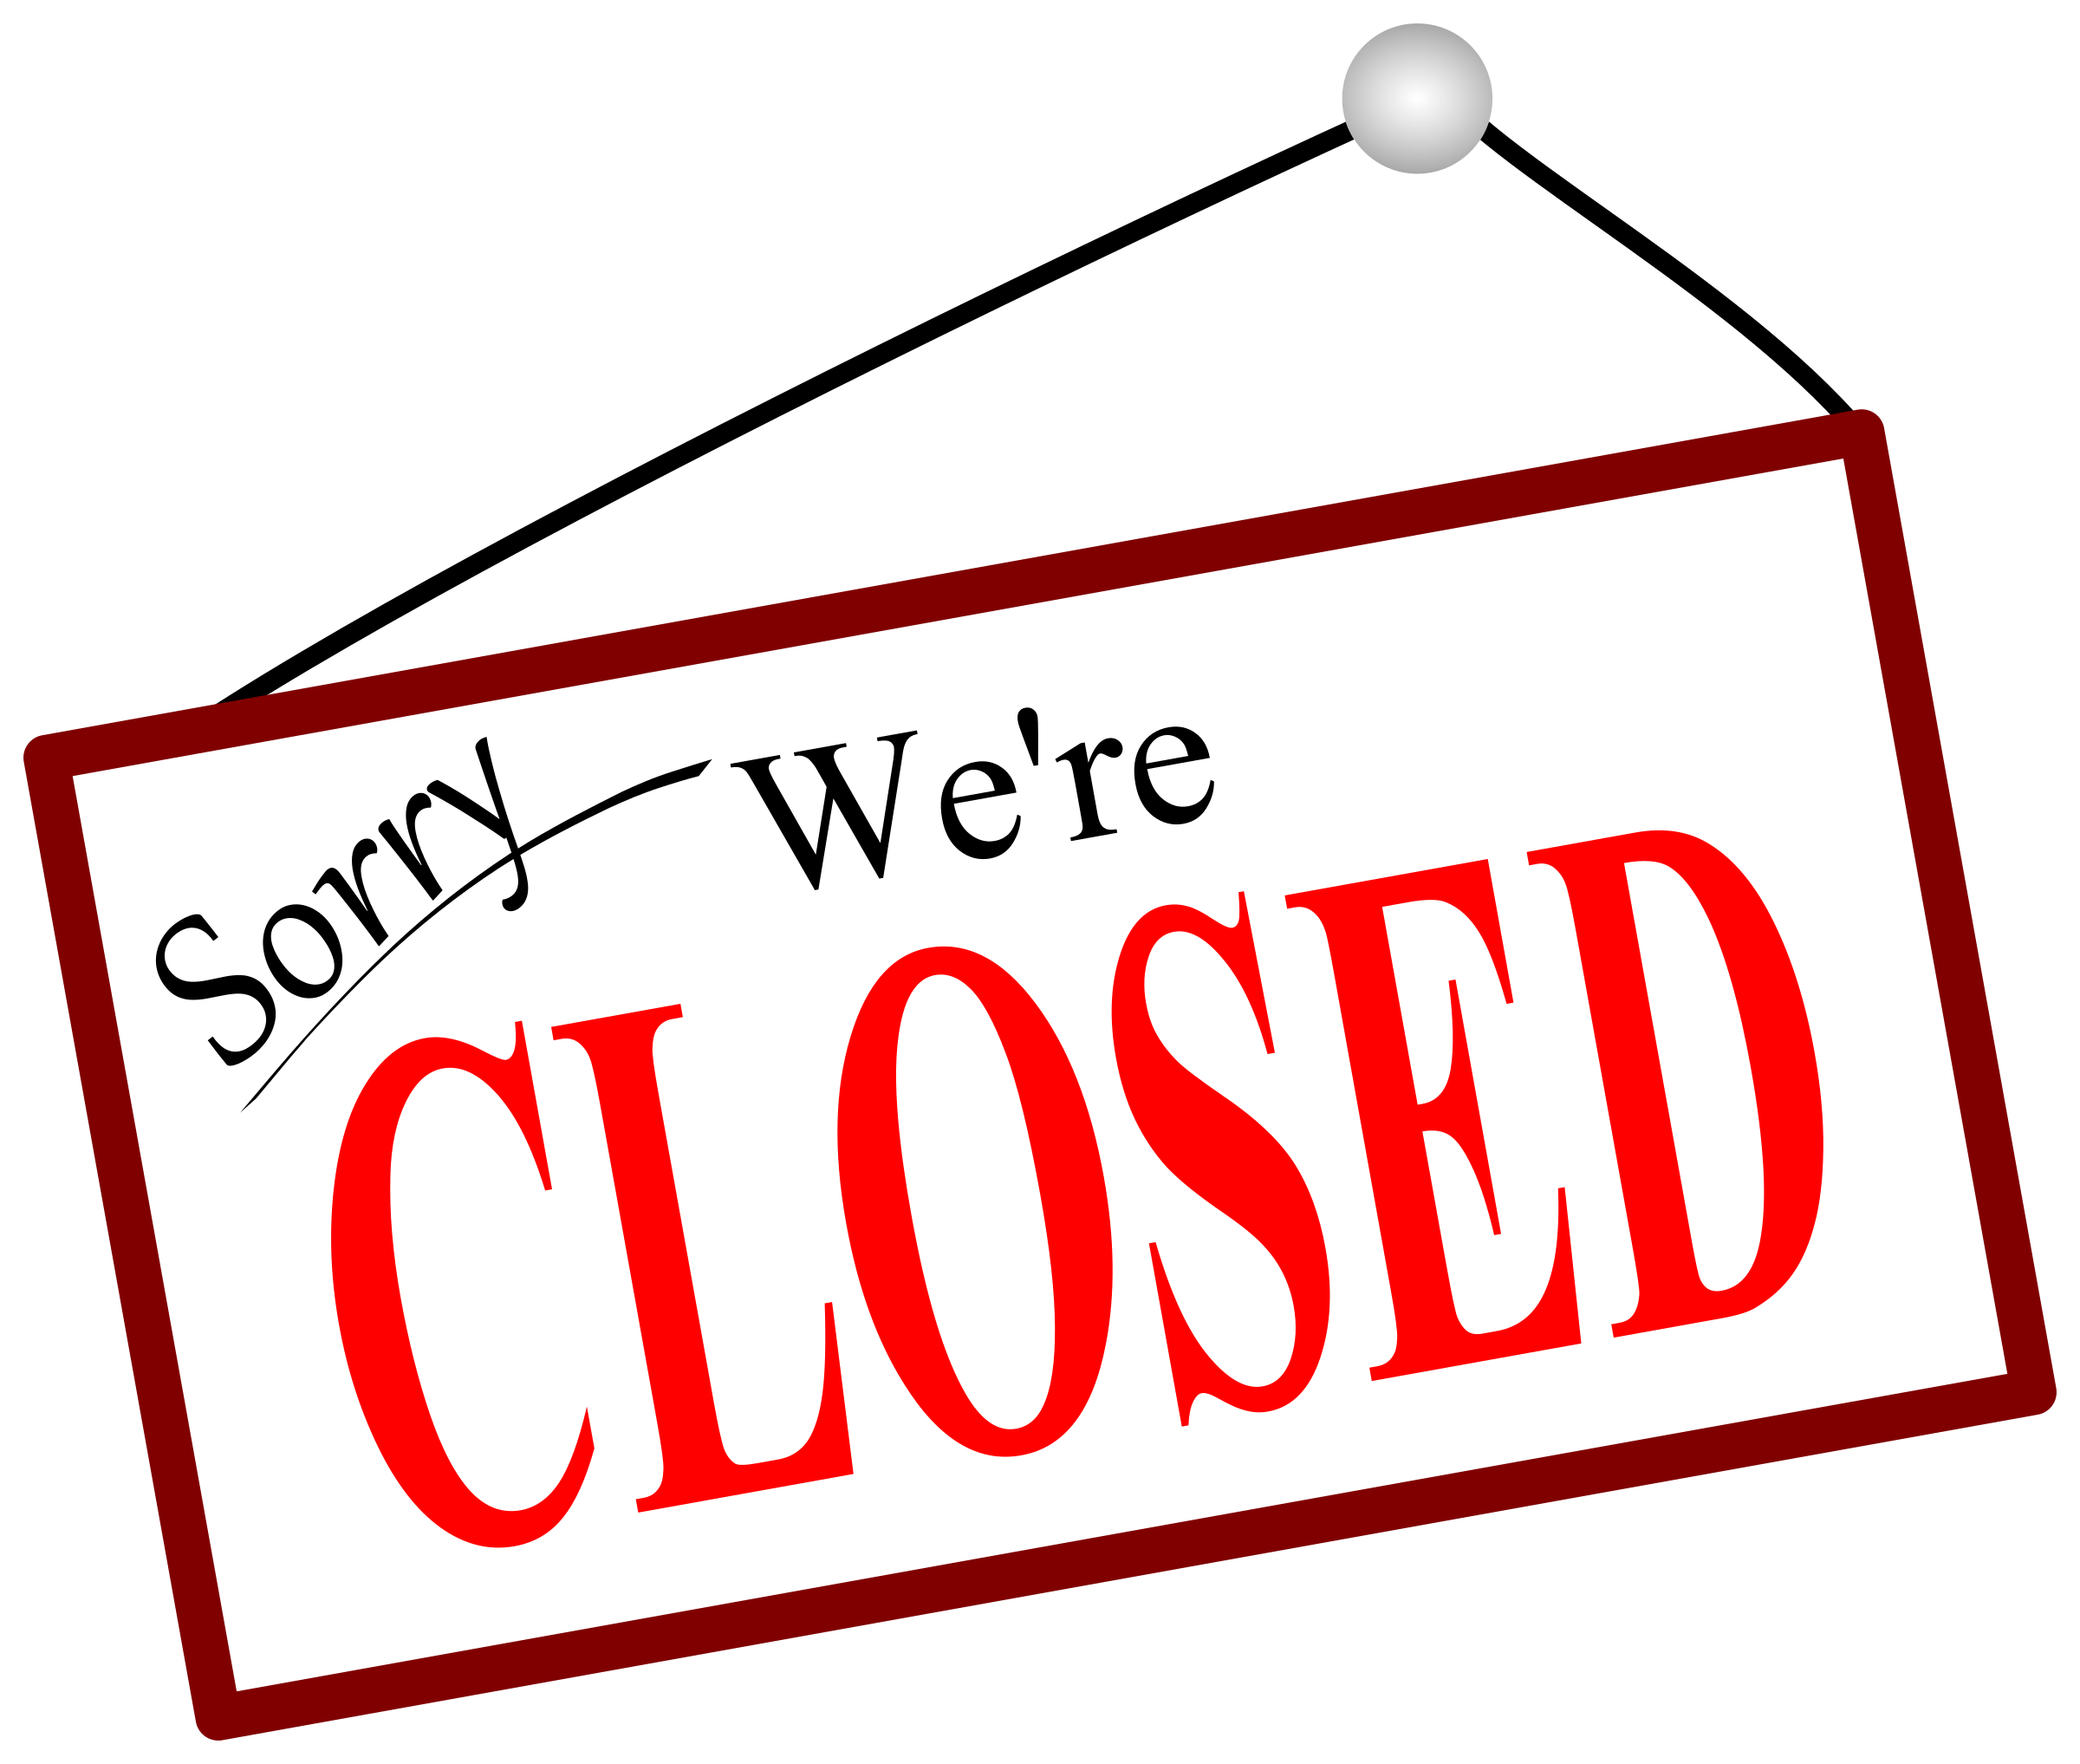 Sorry We Are Closed Transparent